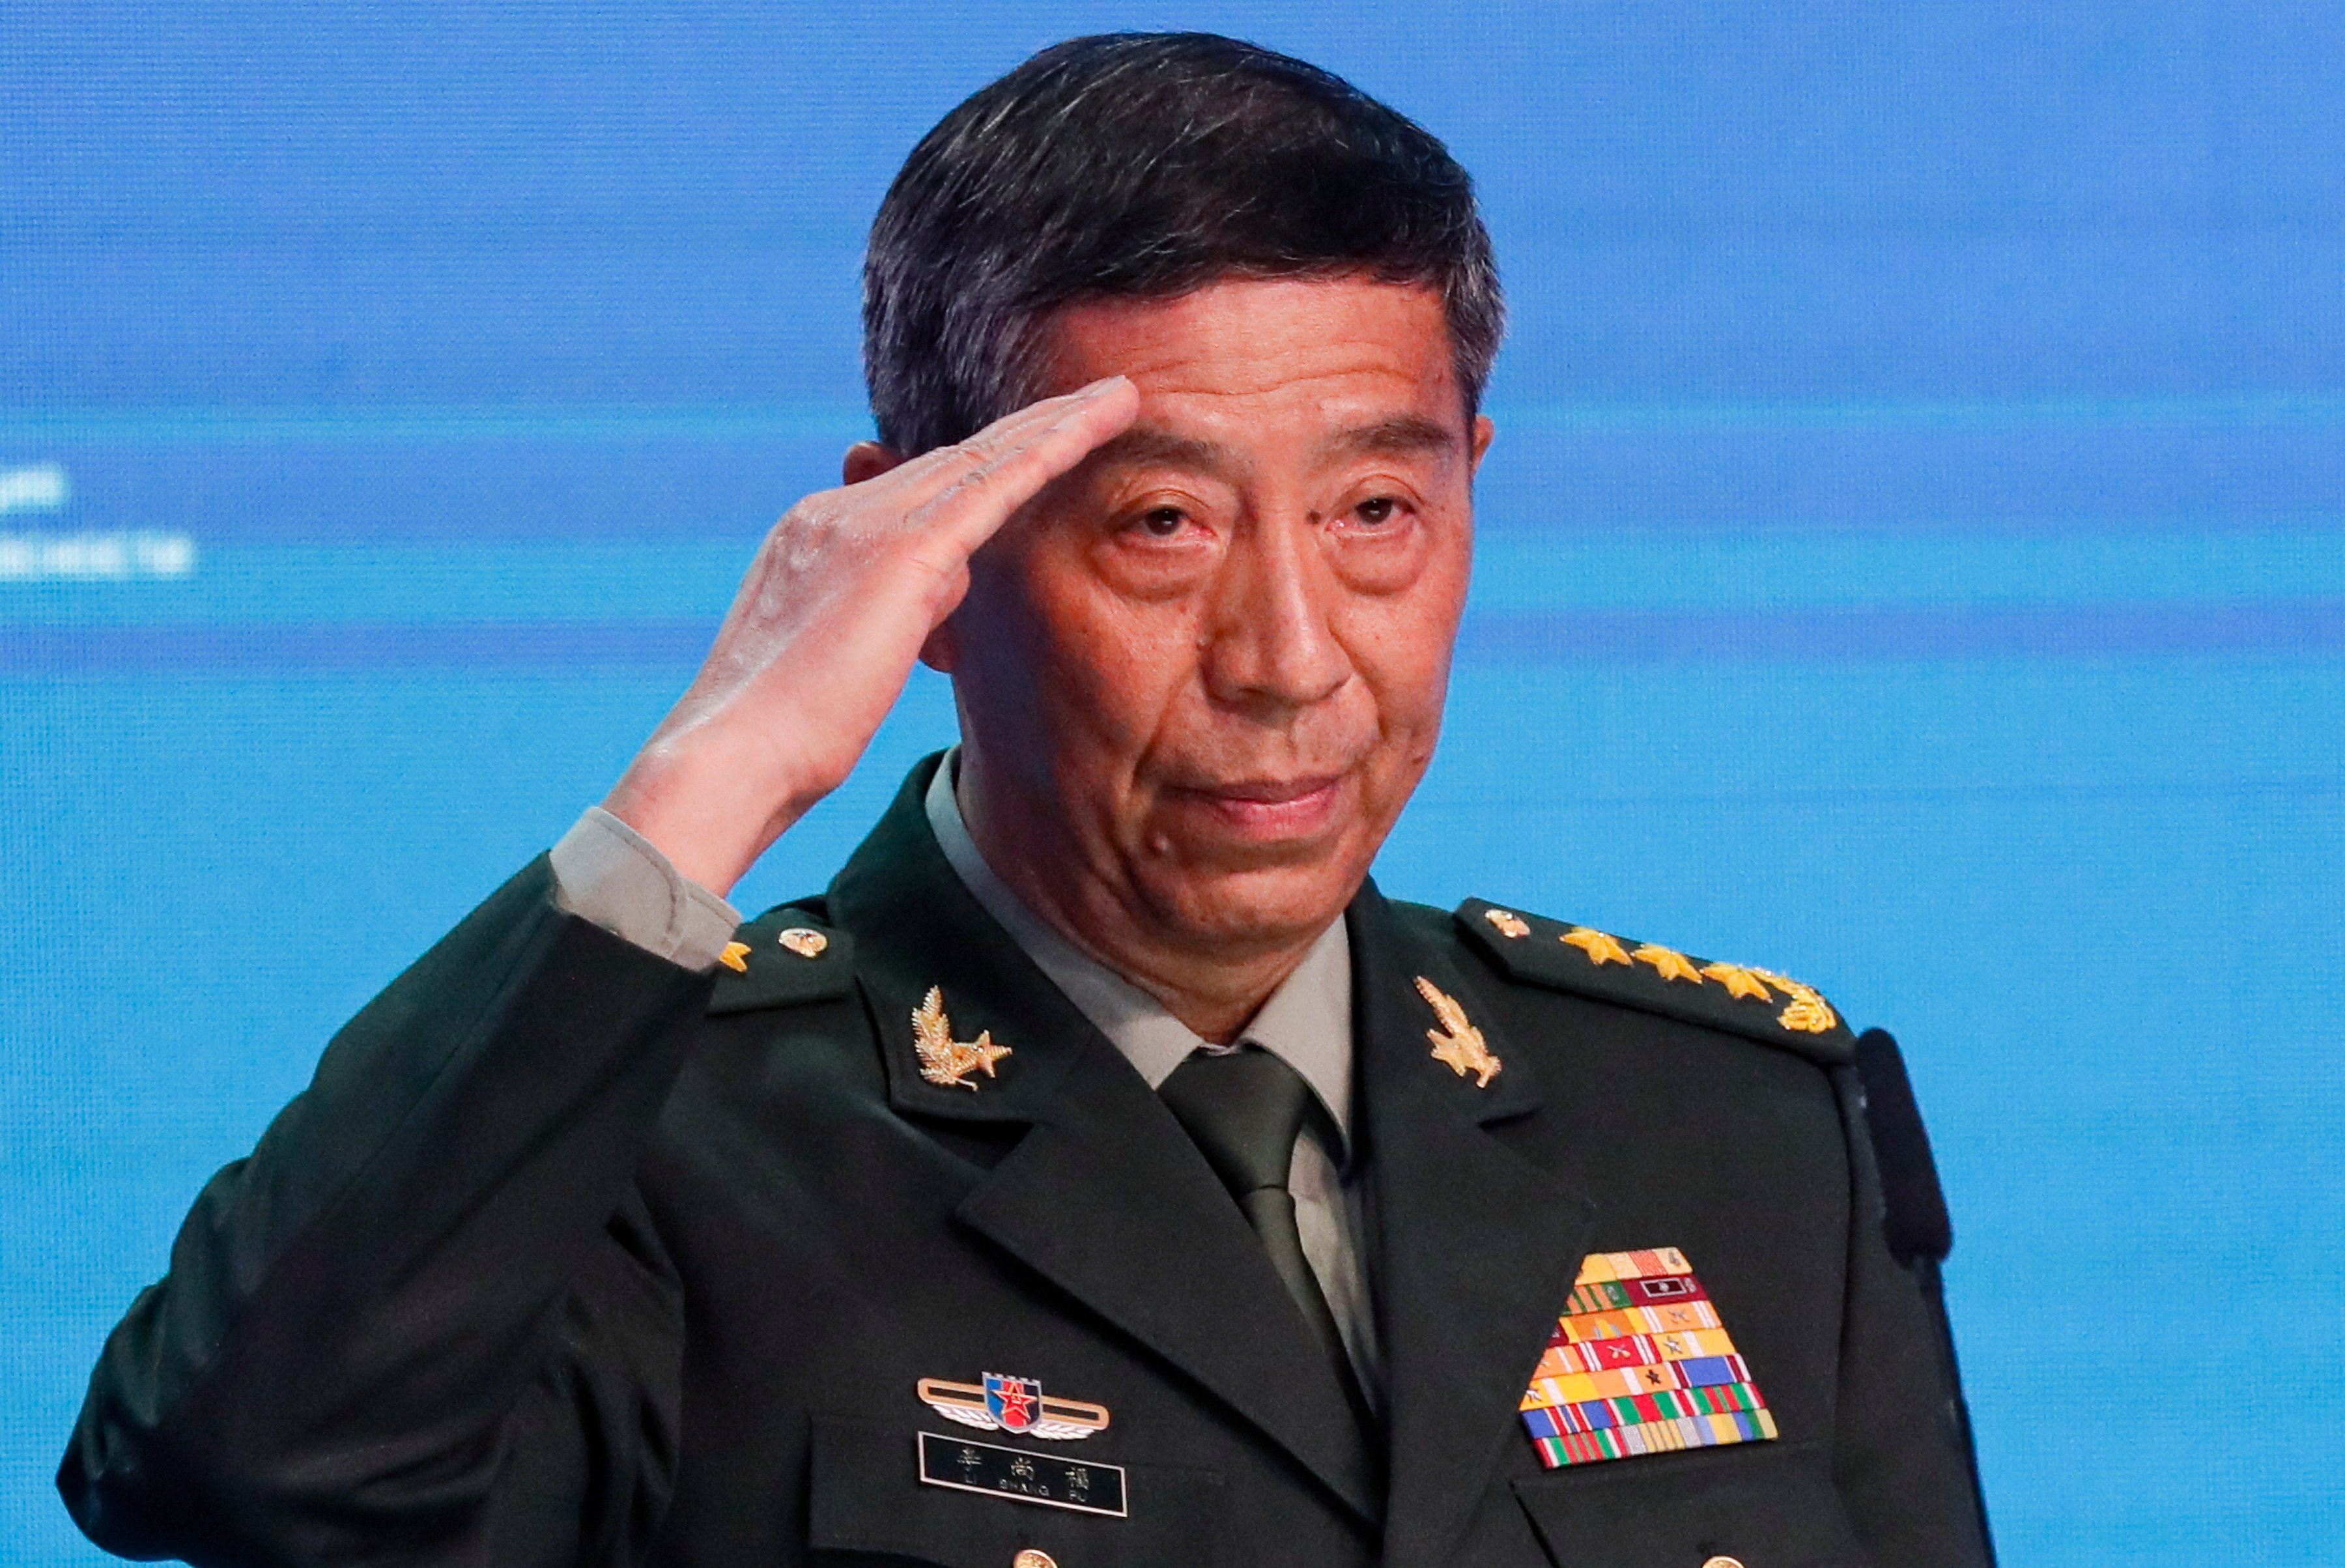 The United States has refused to lift its sanctions against General Li Shangfu, the defence minister of China. Photo: EPA-EFE